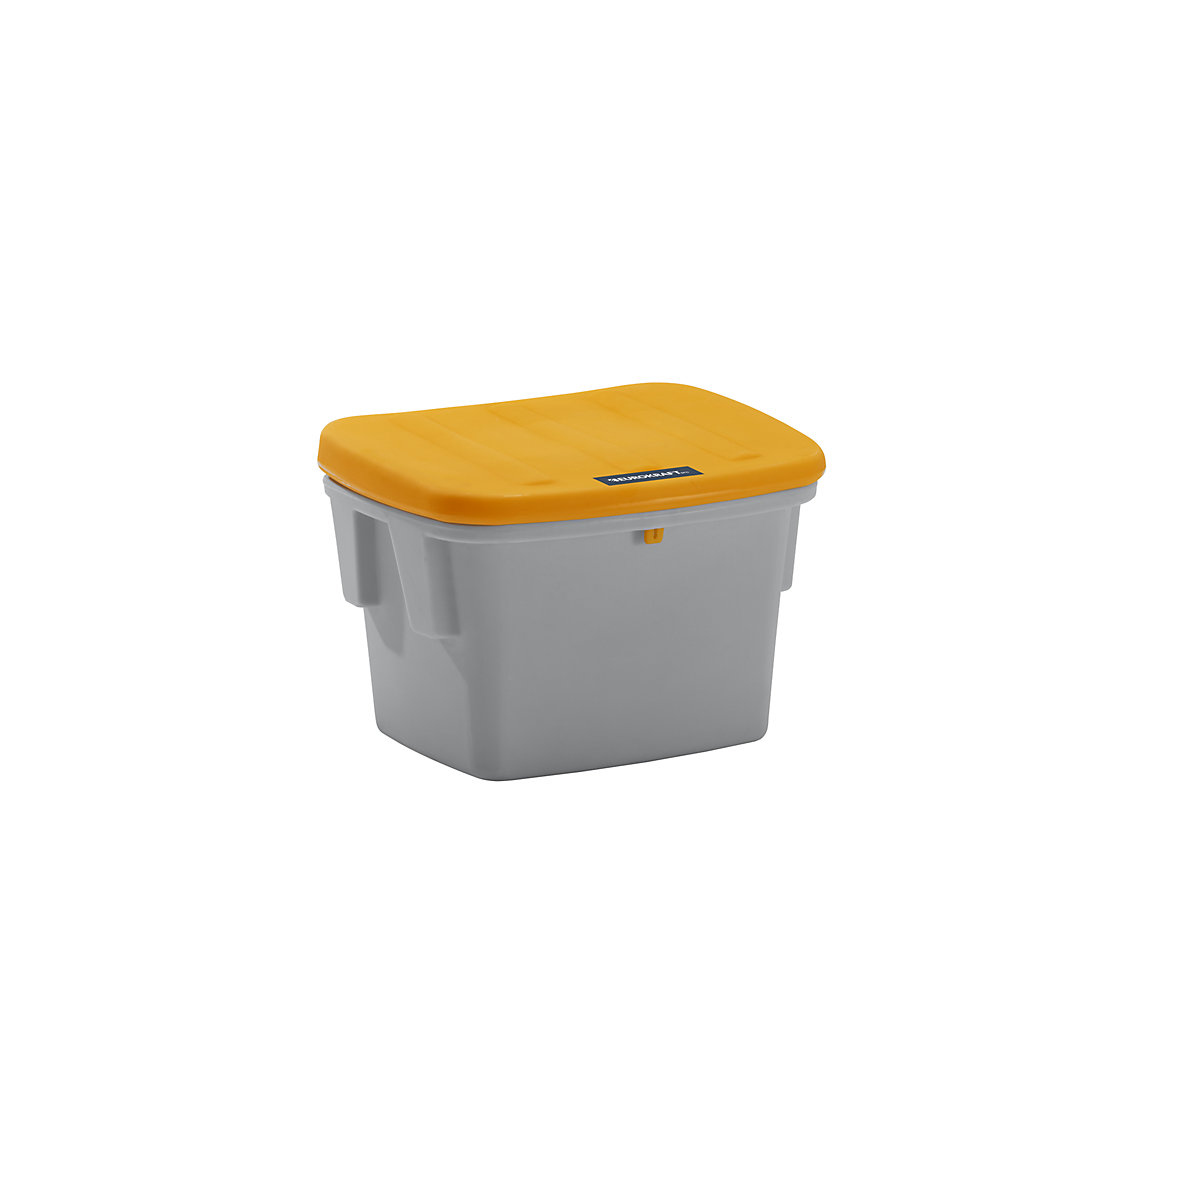 Universal / grit container – eurokraft pro, without dispenser opening, 60 l, orange lid-11